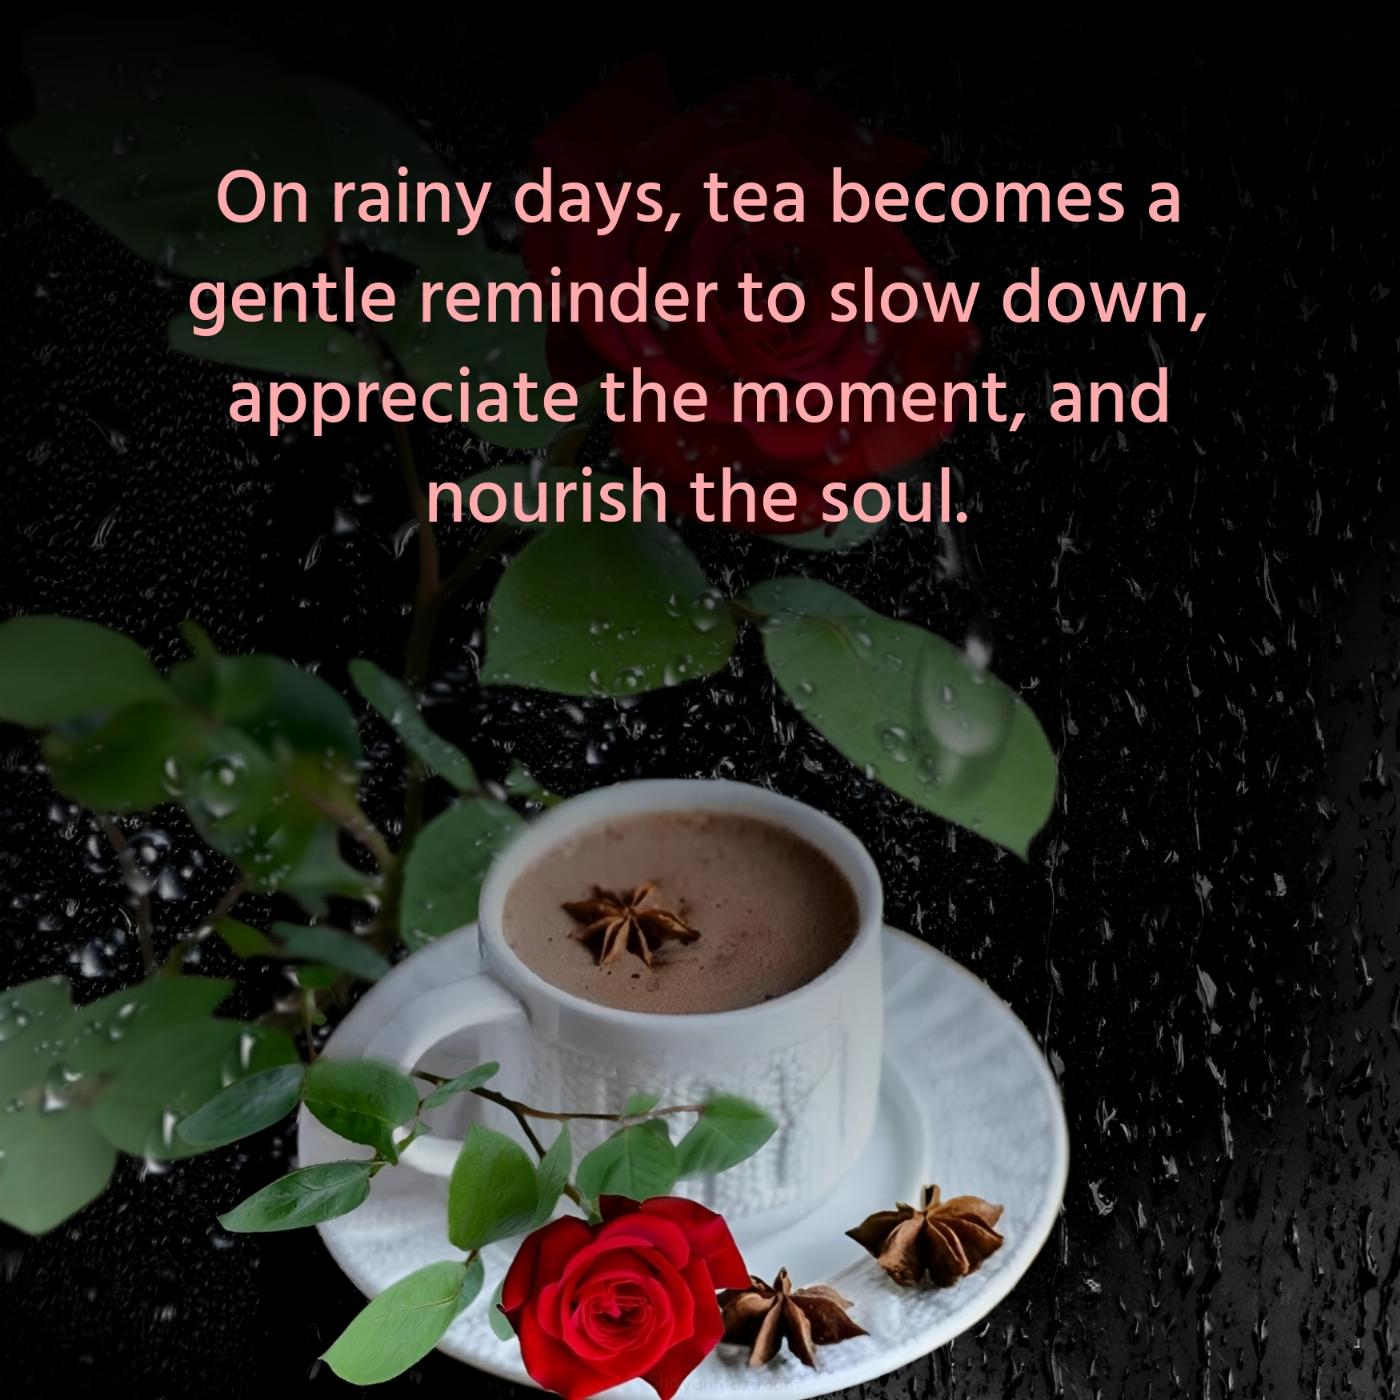 On rainy days tea becomes a gentle reminder to slow down